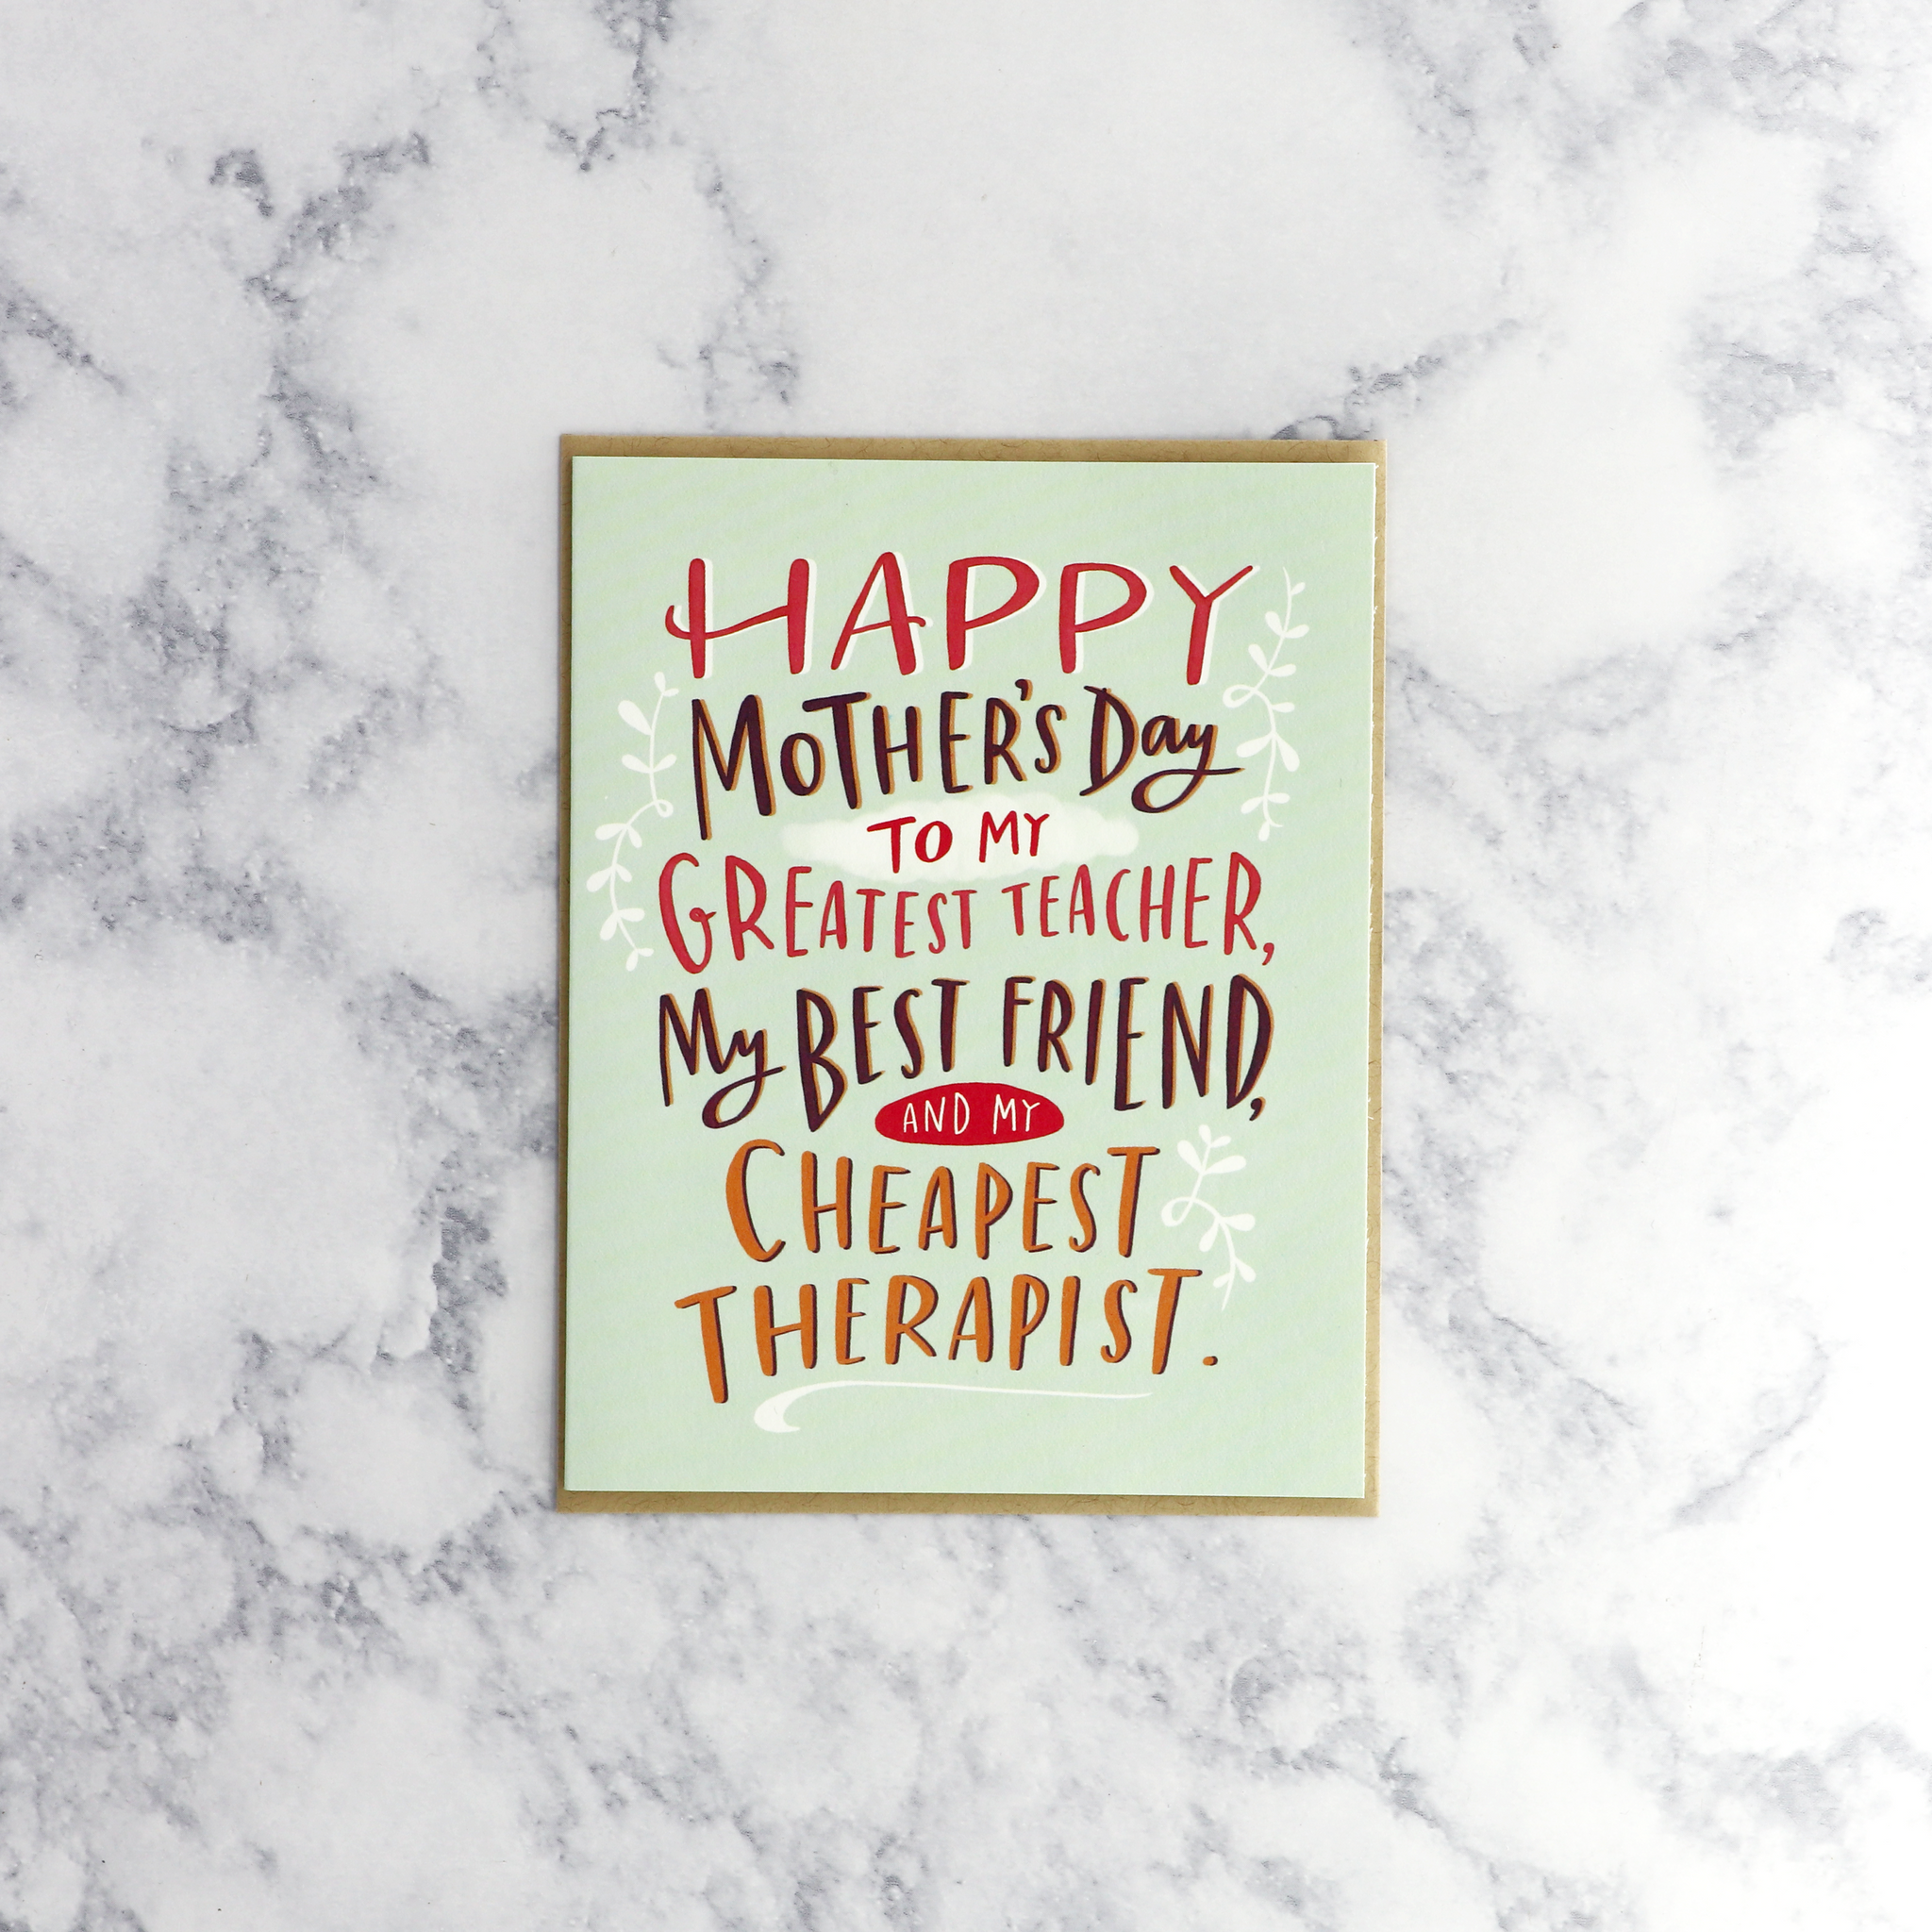 "Cheapest Therapist" Mother's Day Card (For Mom)